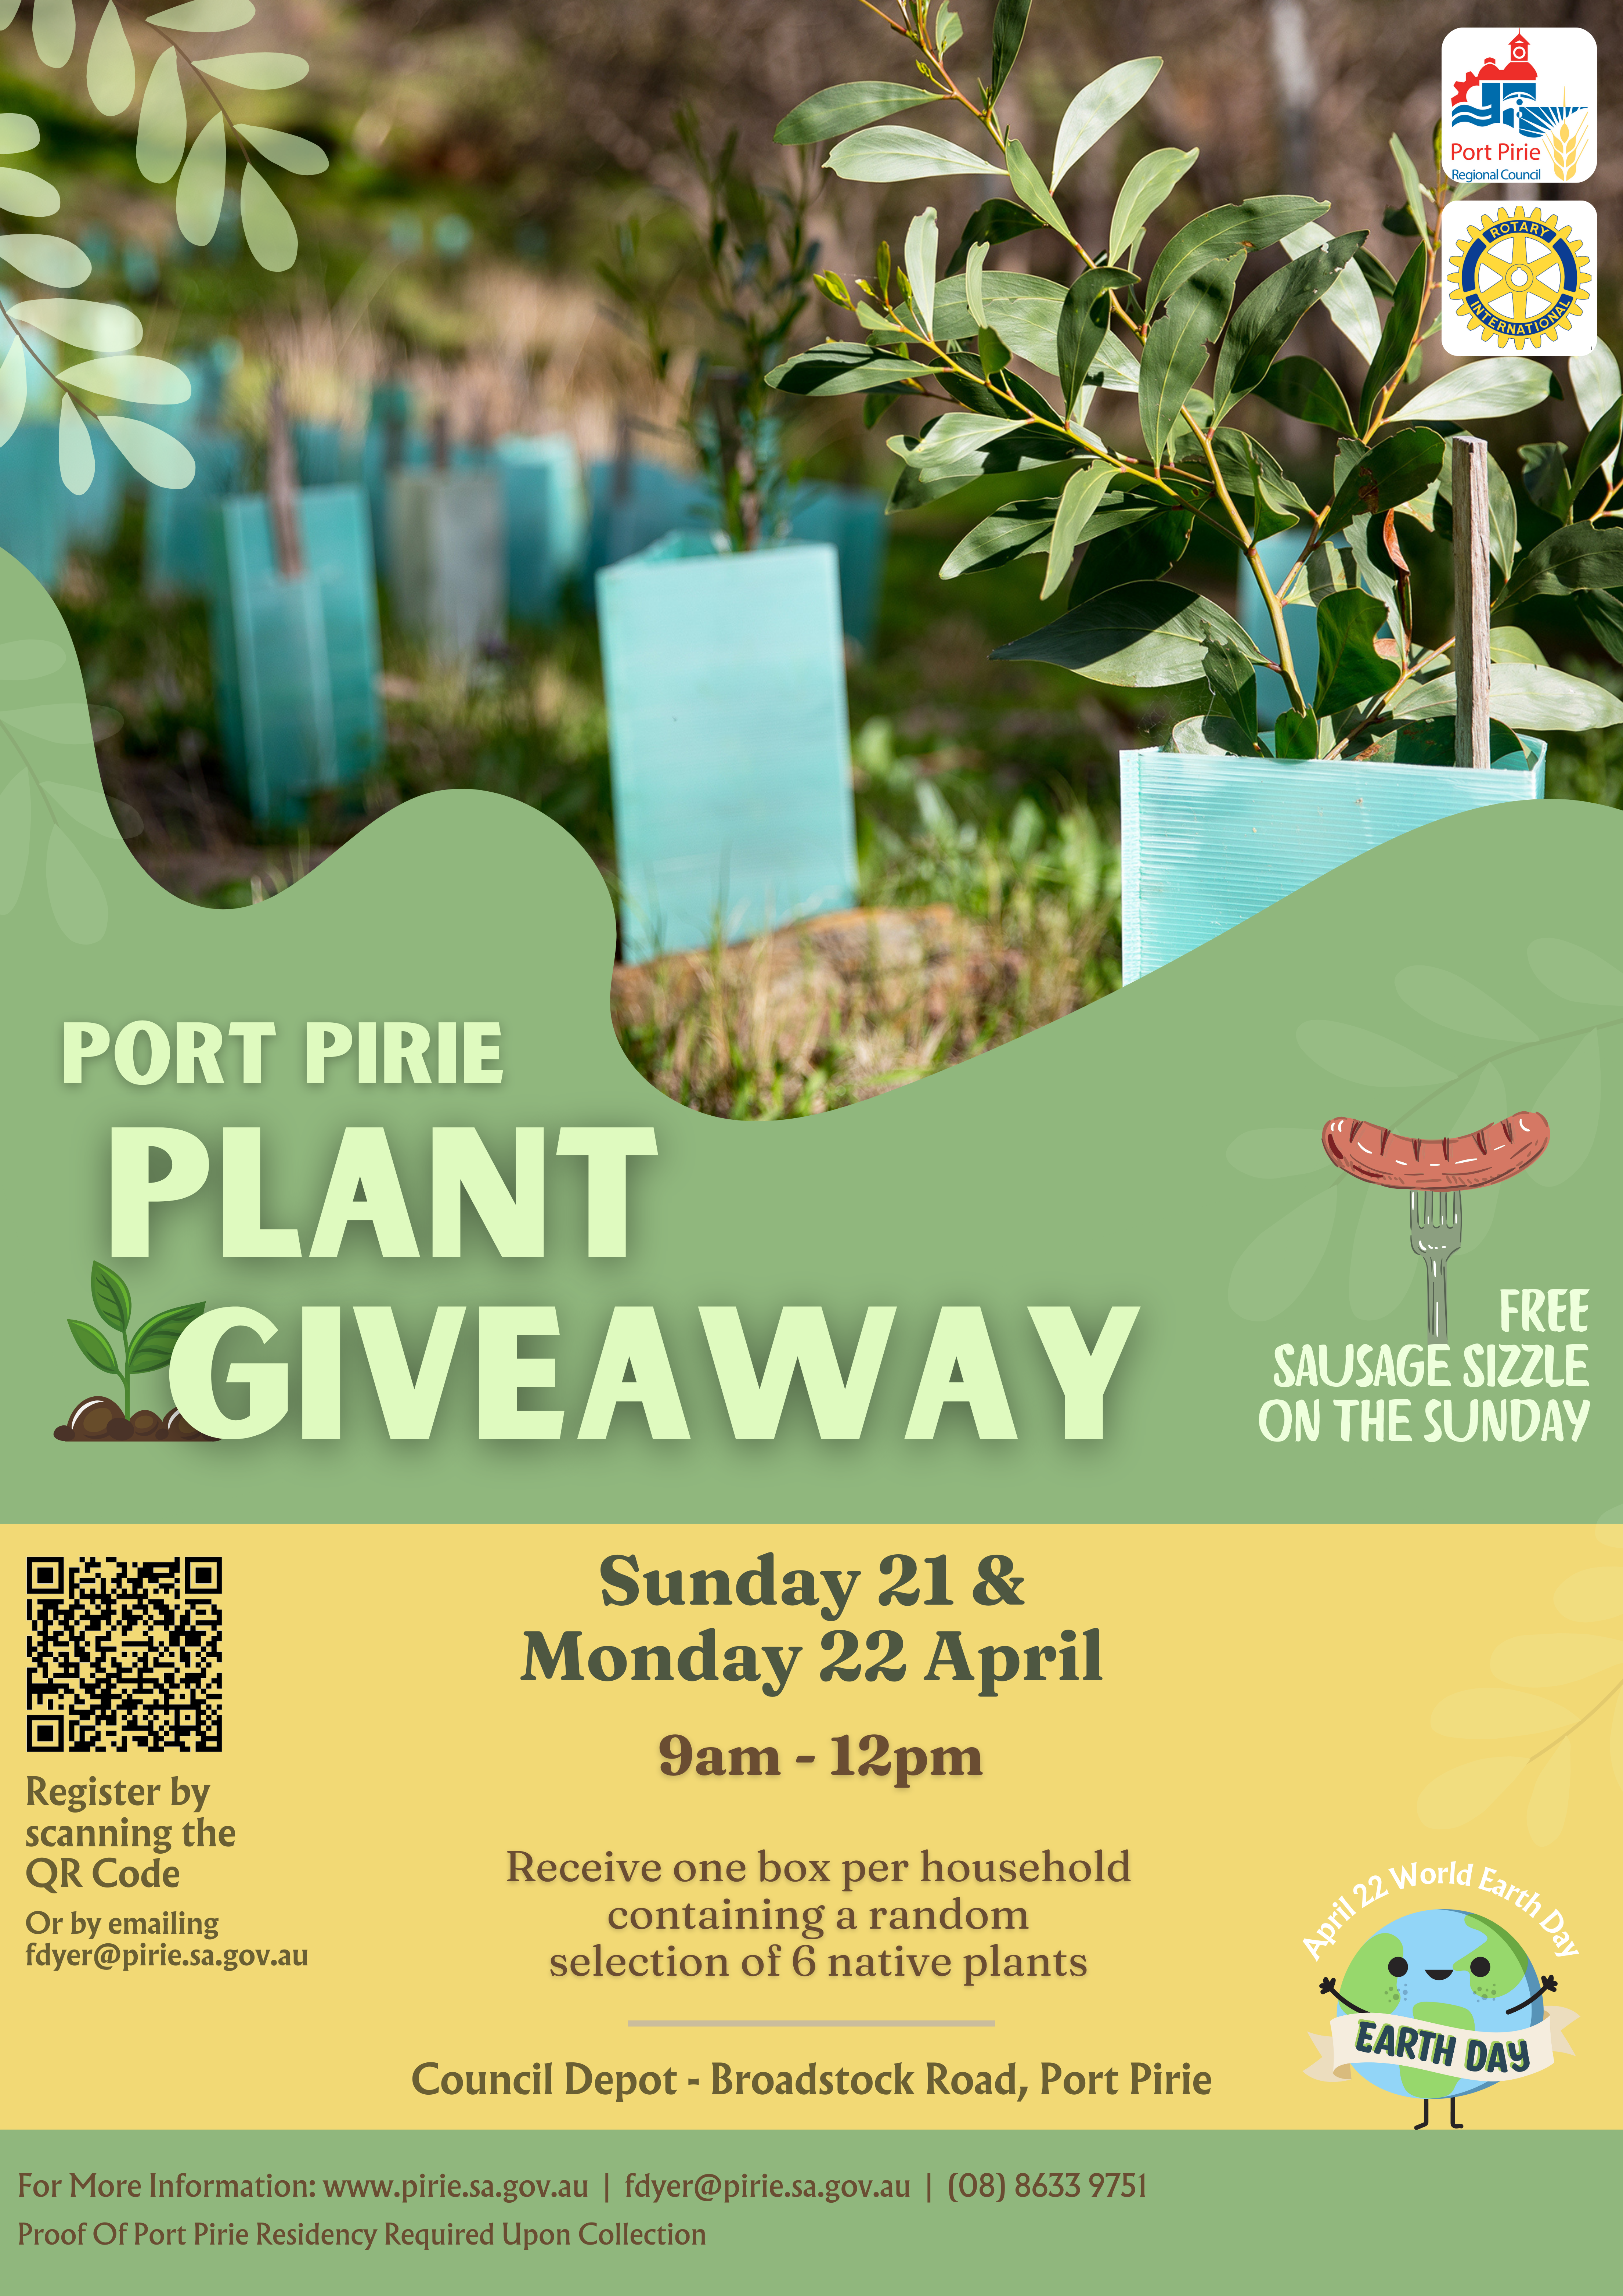 flyer for plant giveaway with photo of native plant seedlings